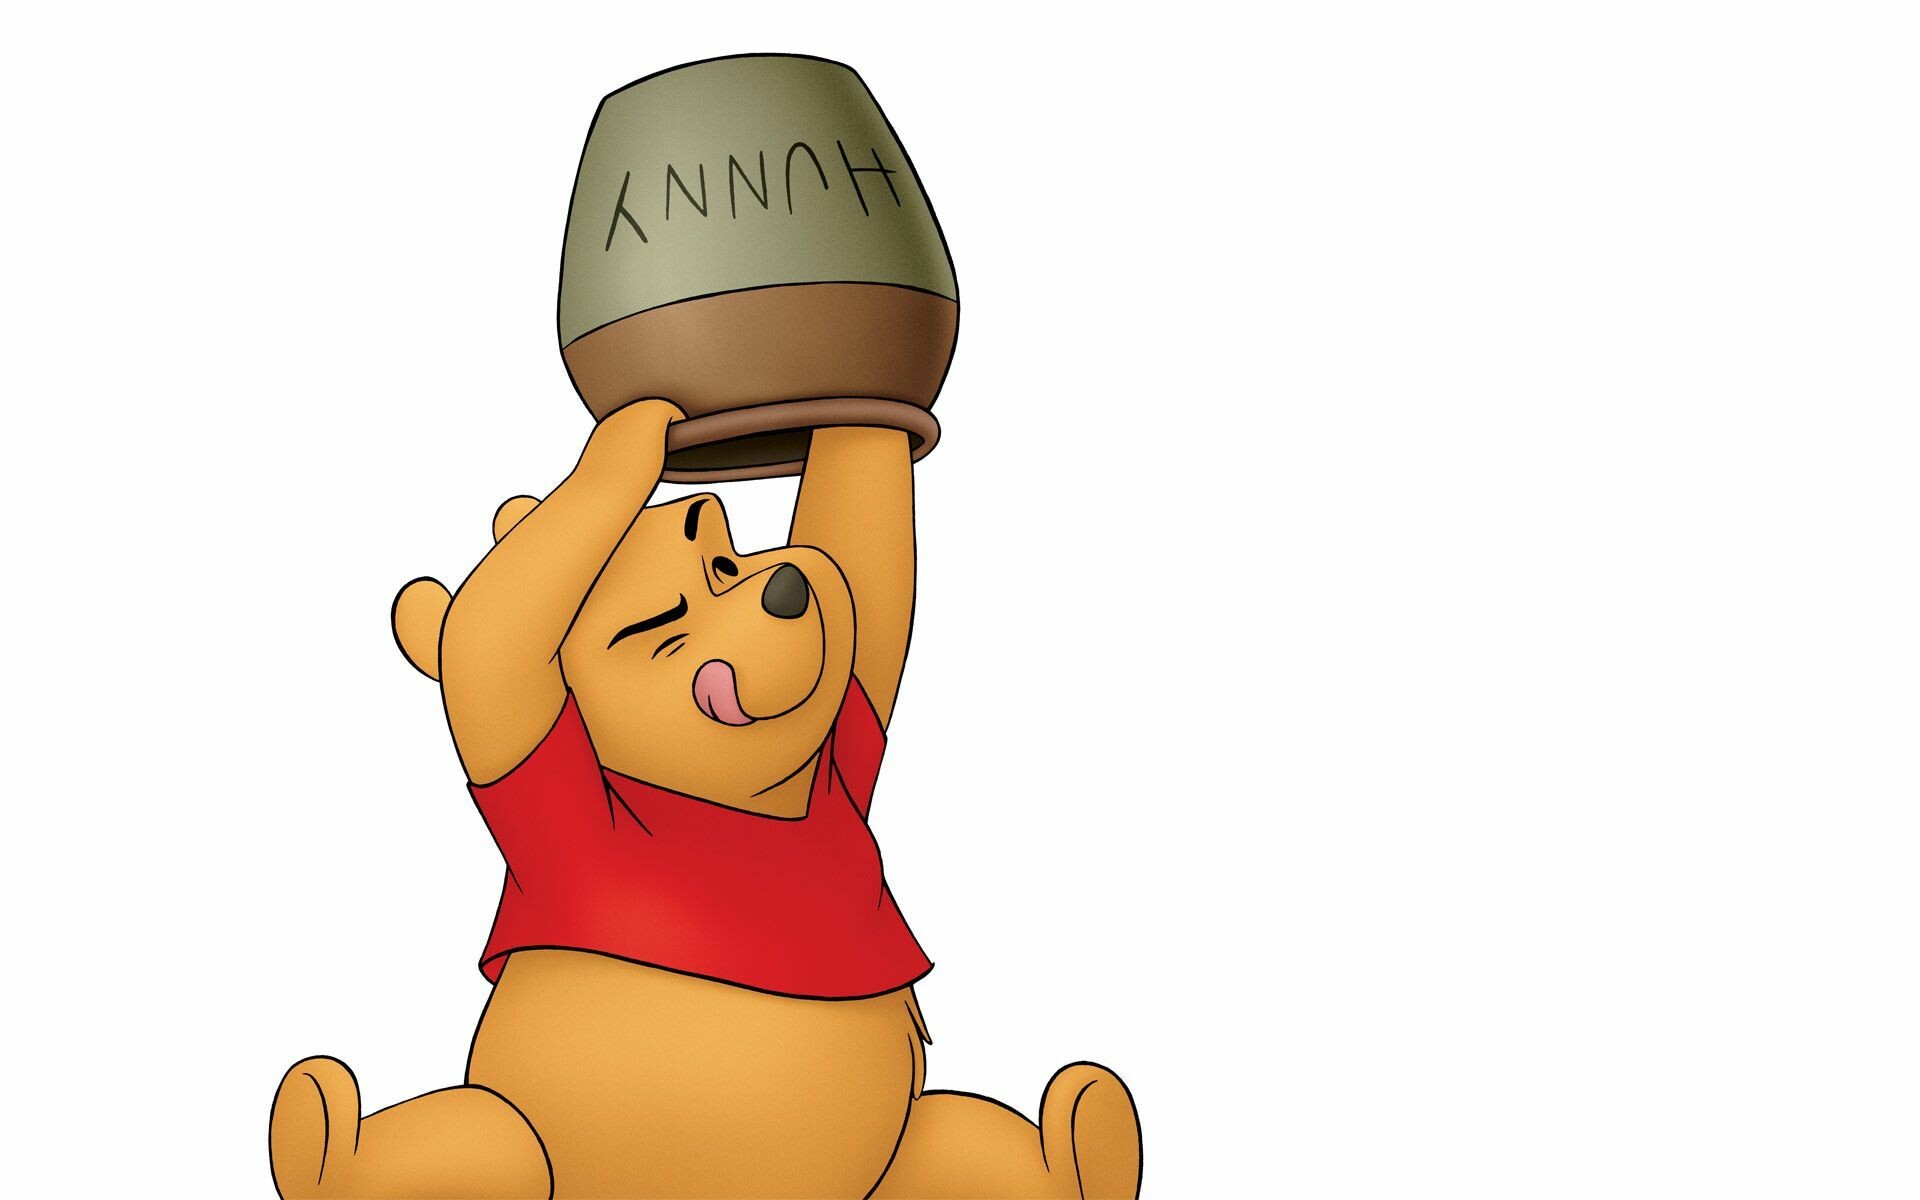 The Many Adventures of Winnie the Pooh: A fictional teddy bear created by English author A. A. Milne, One of the most popular characters adapted for film and television by The Walt Disney Company. 1920x1200 HD Wallpaper.